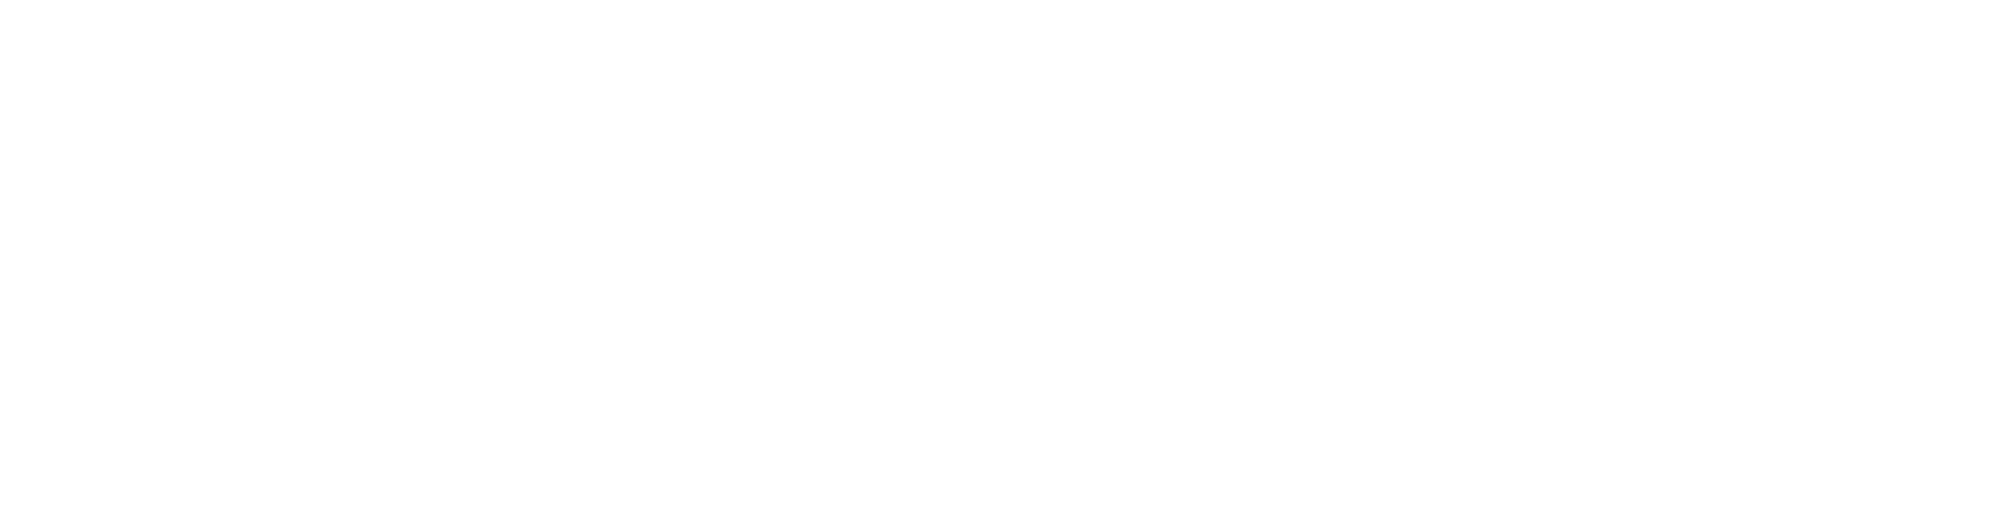 Number of sStates large type